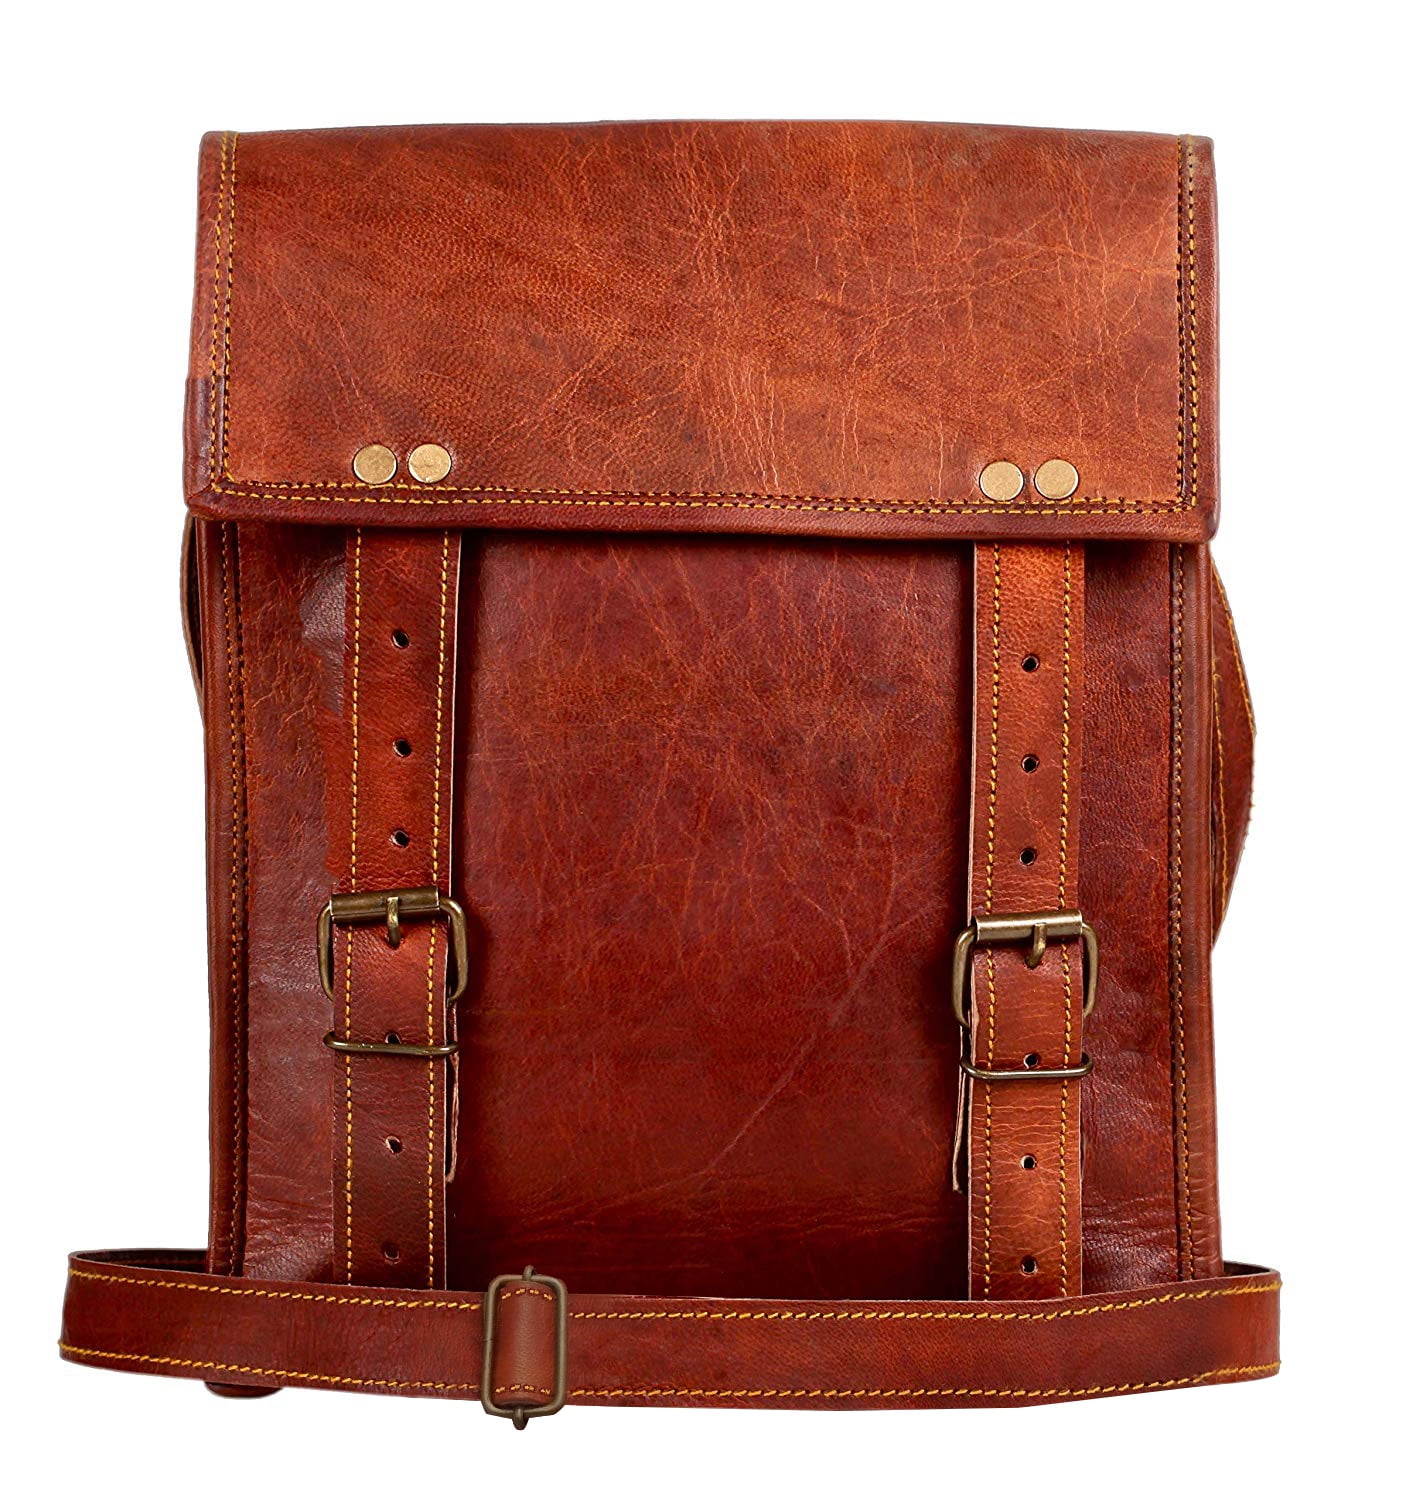 Top Layer Leather Mens Bag Single Shoulder Messenger Bags for iPad Laptop dark coffee, large 